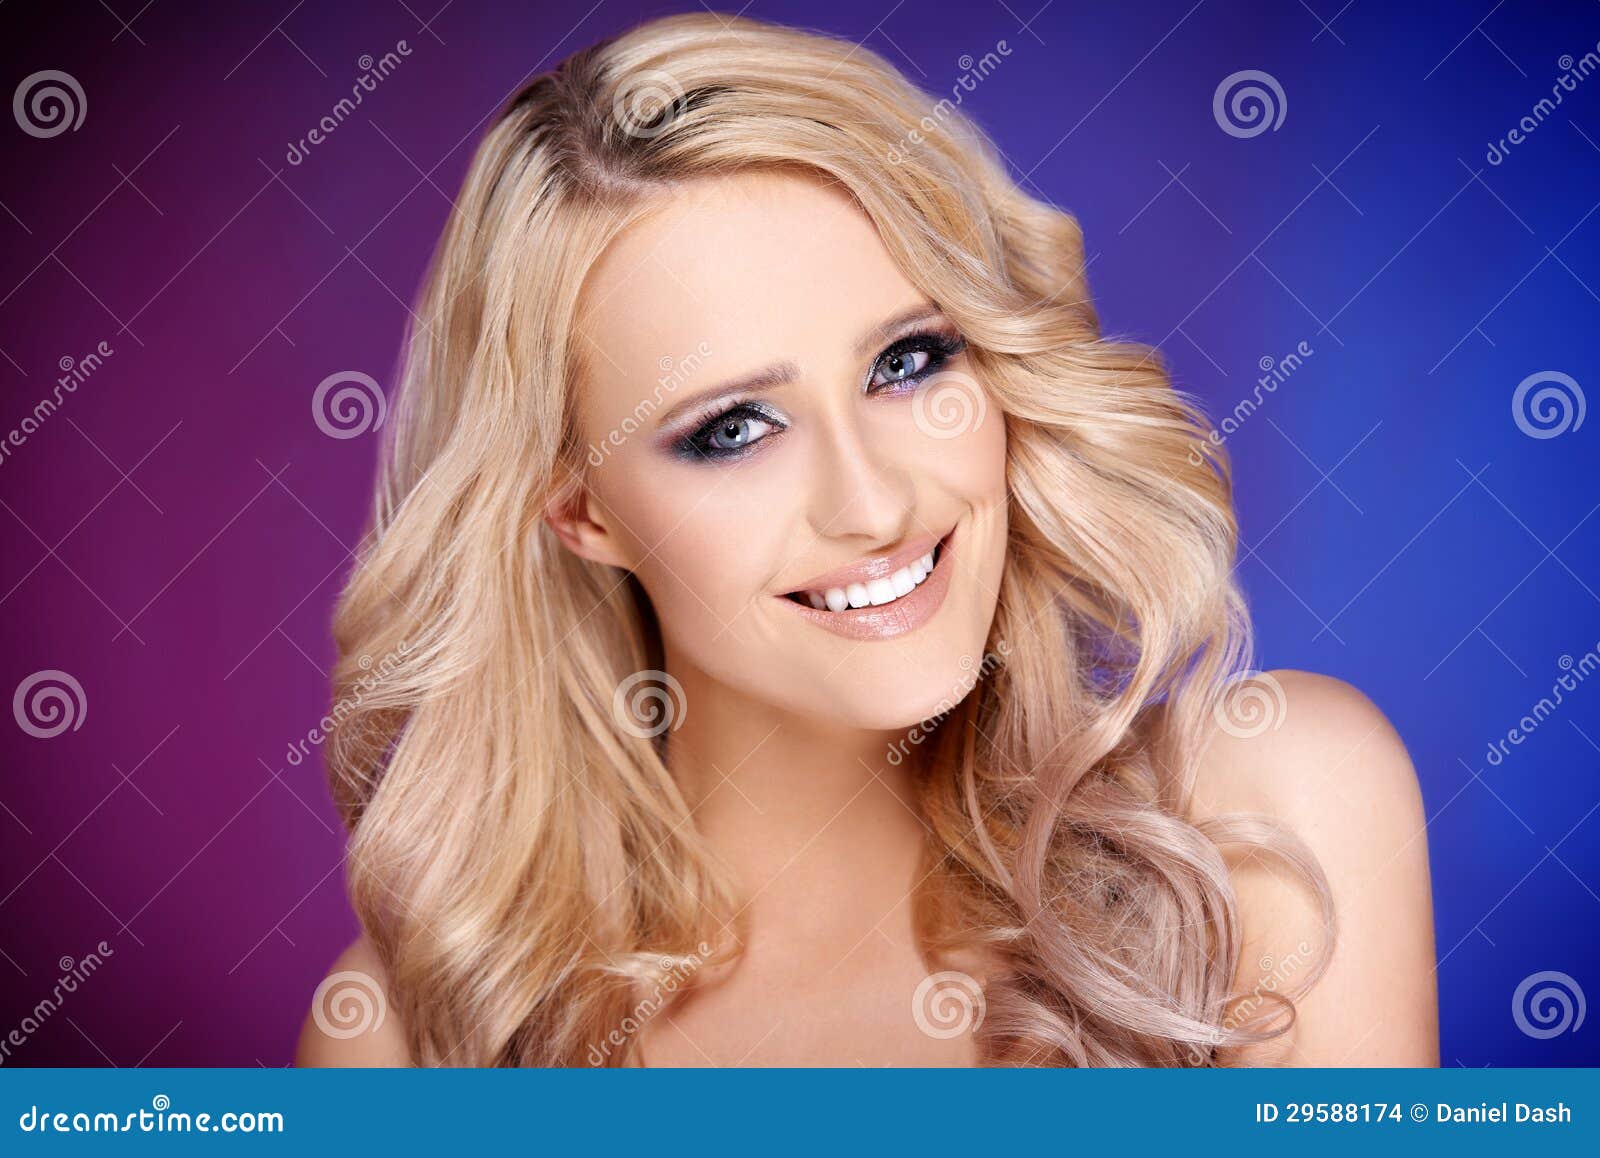 Free Images of Blond Hair - wide 6